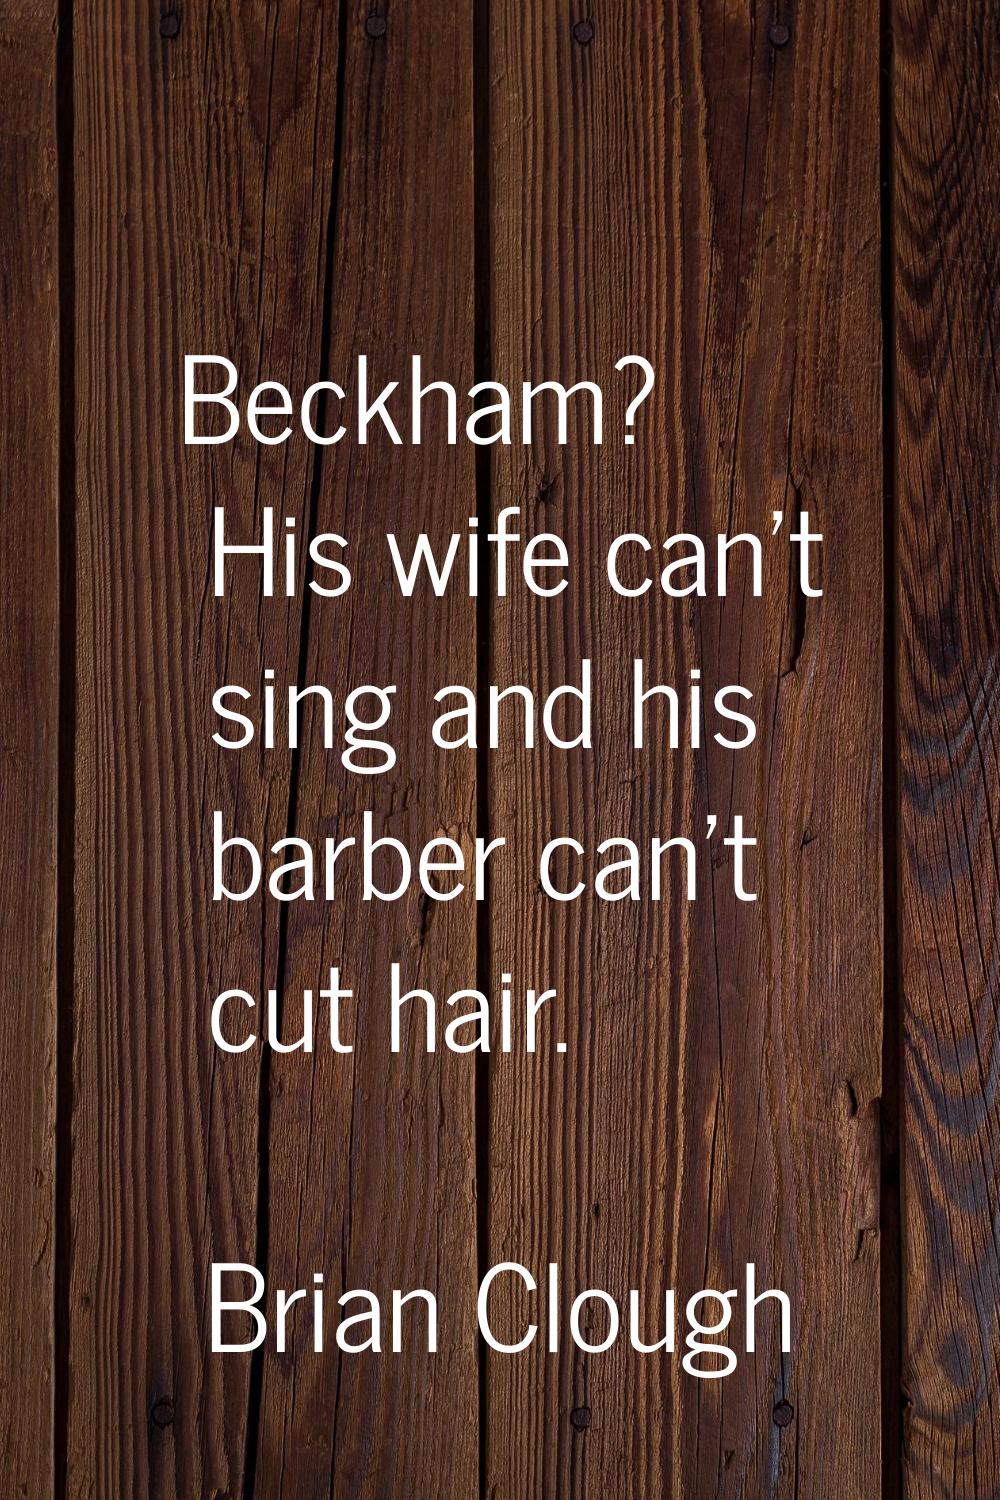 Beckham? His wife can't sing and his barber can't cut hair.